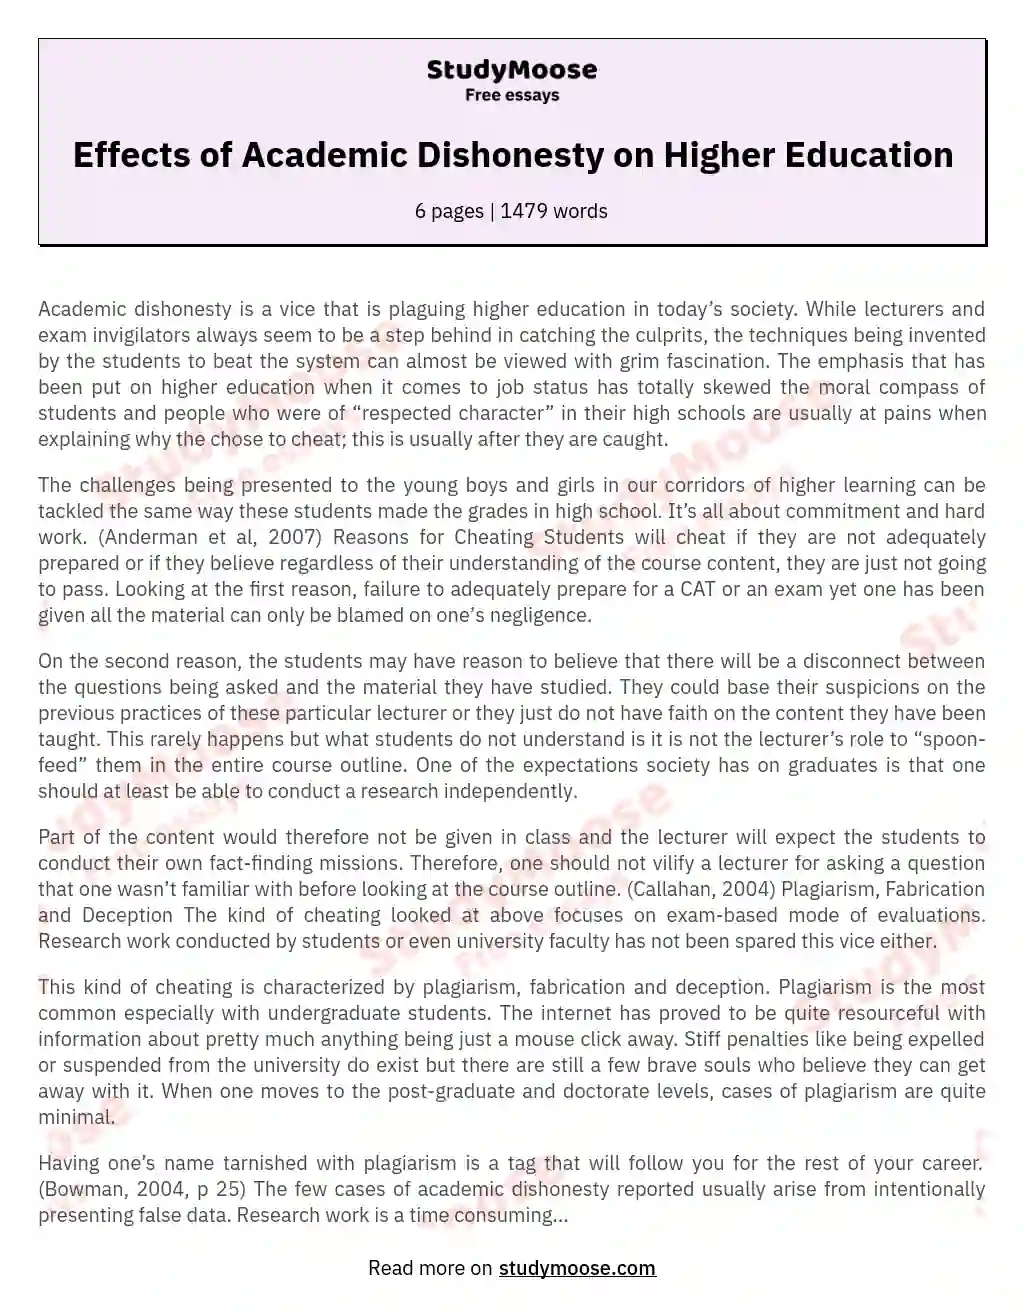 Effects of Academic Dishonesty on Higher Education